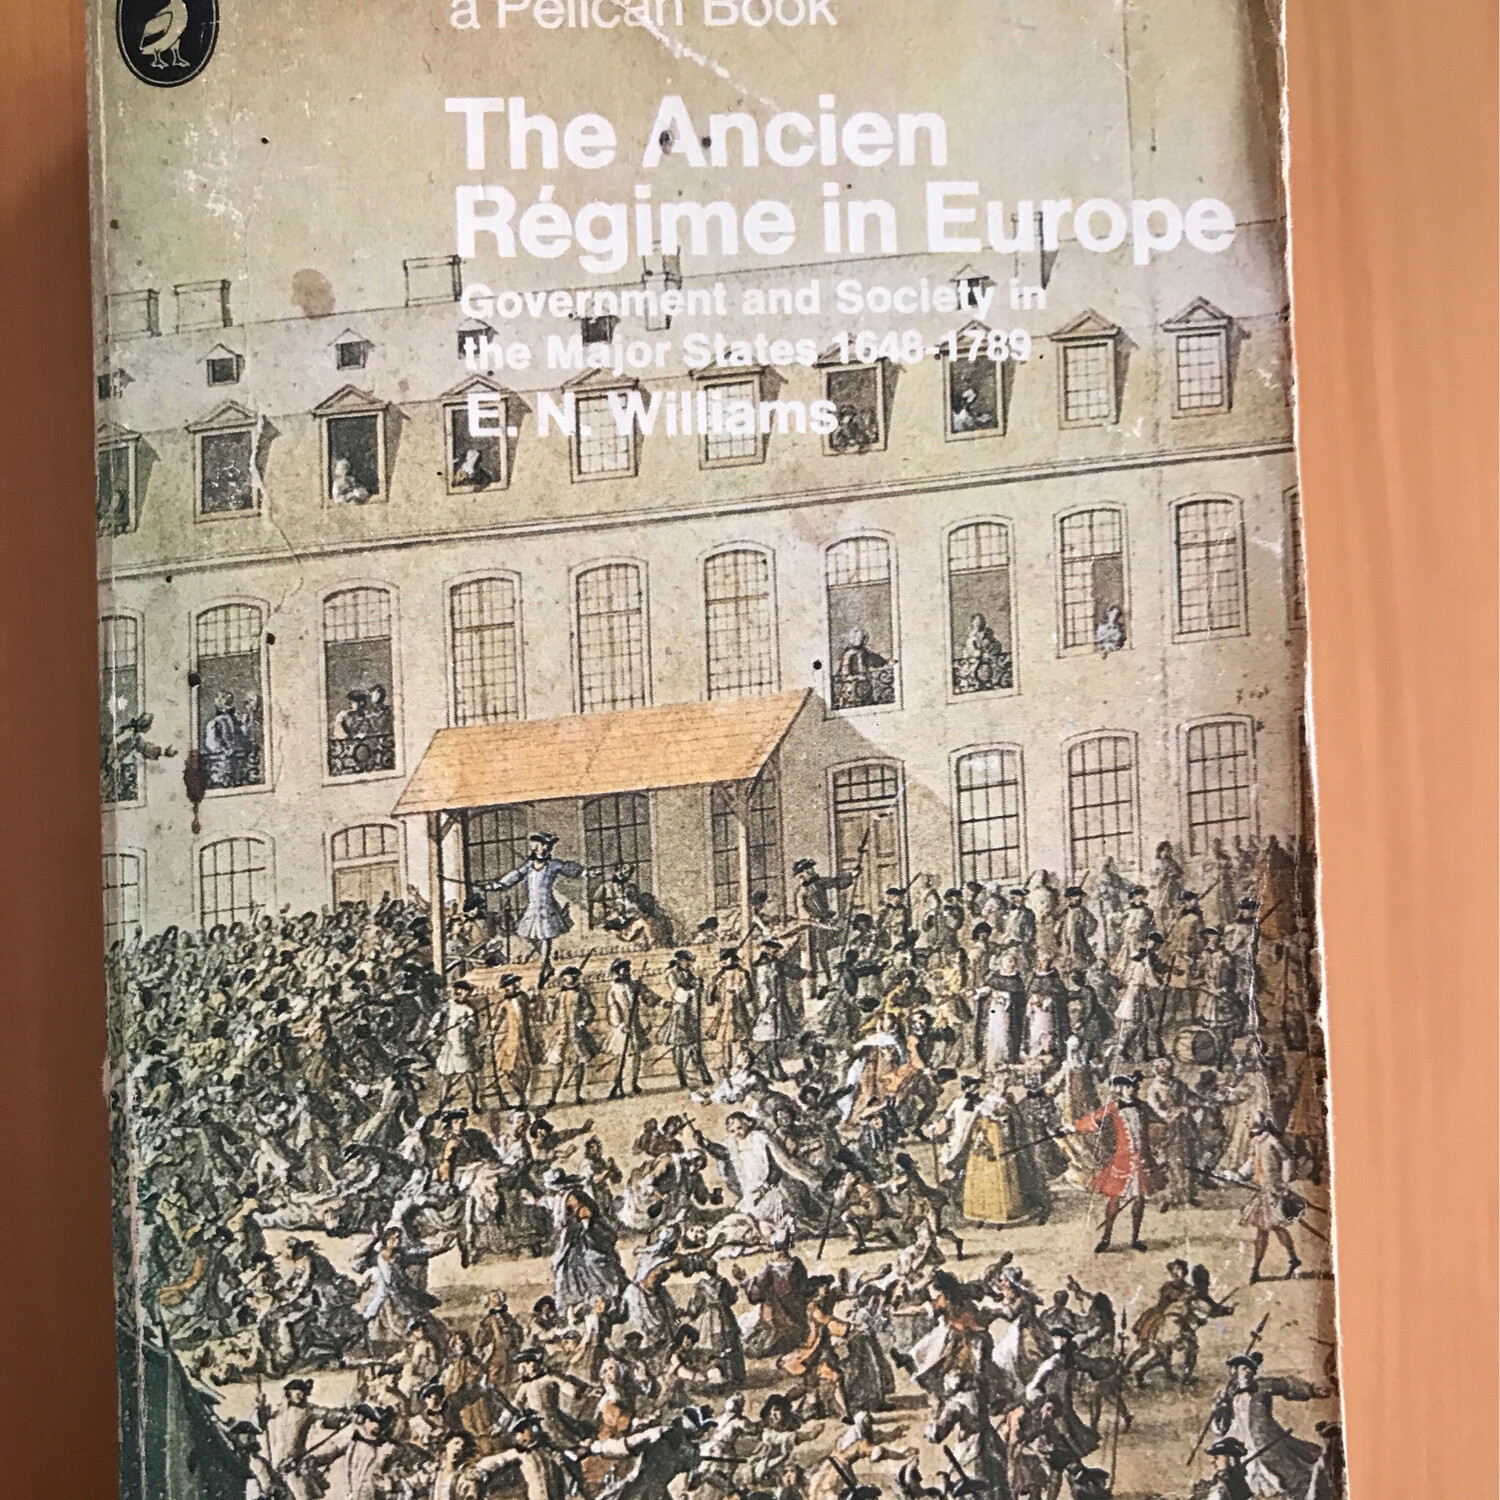 The Ancien Regime In Europe, E. N. Williams